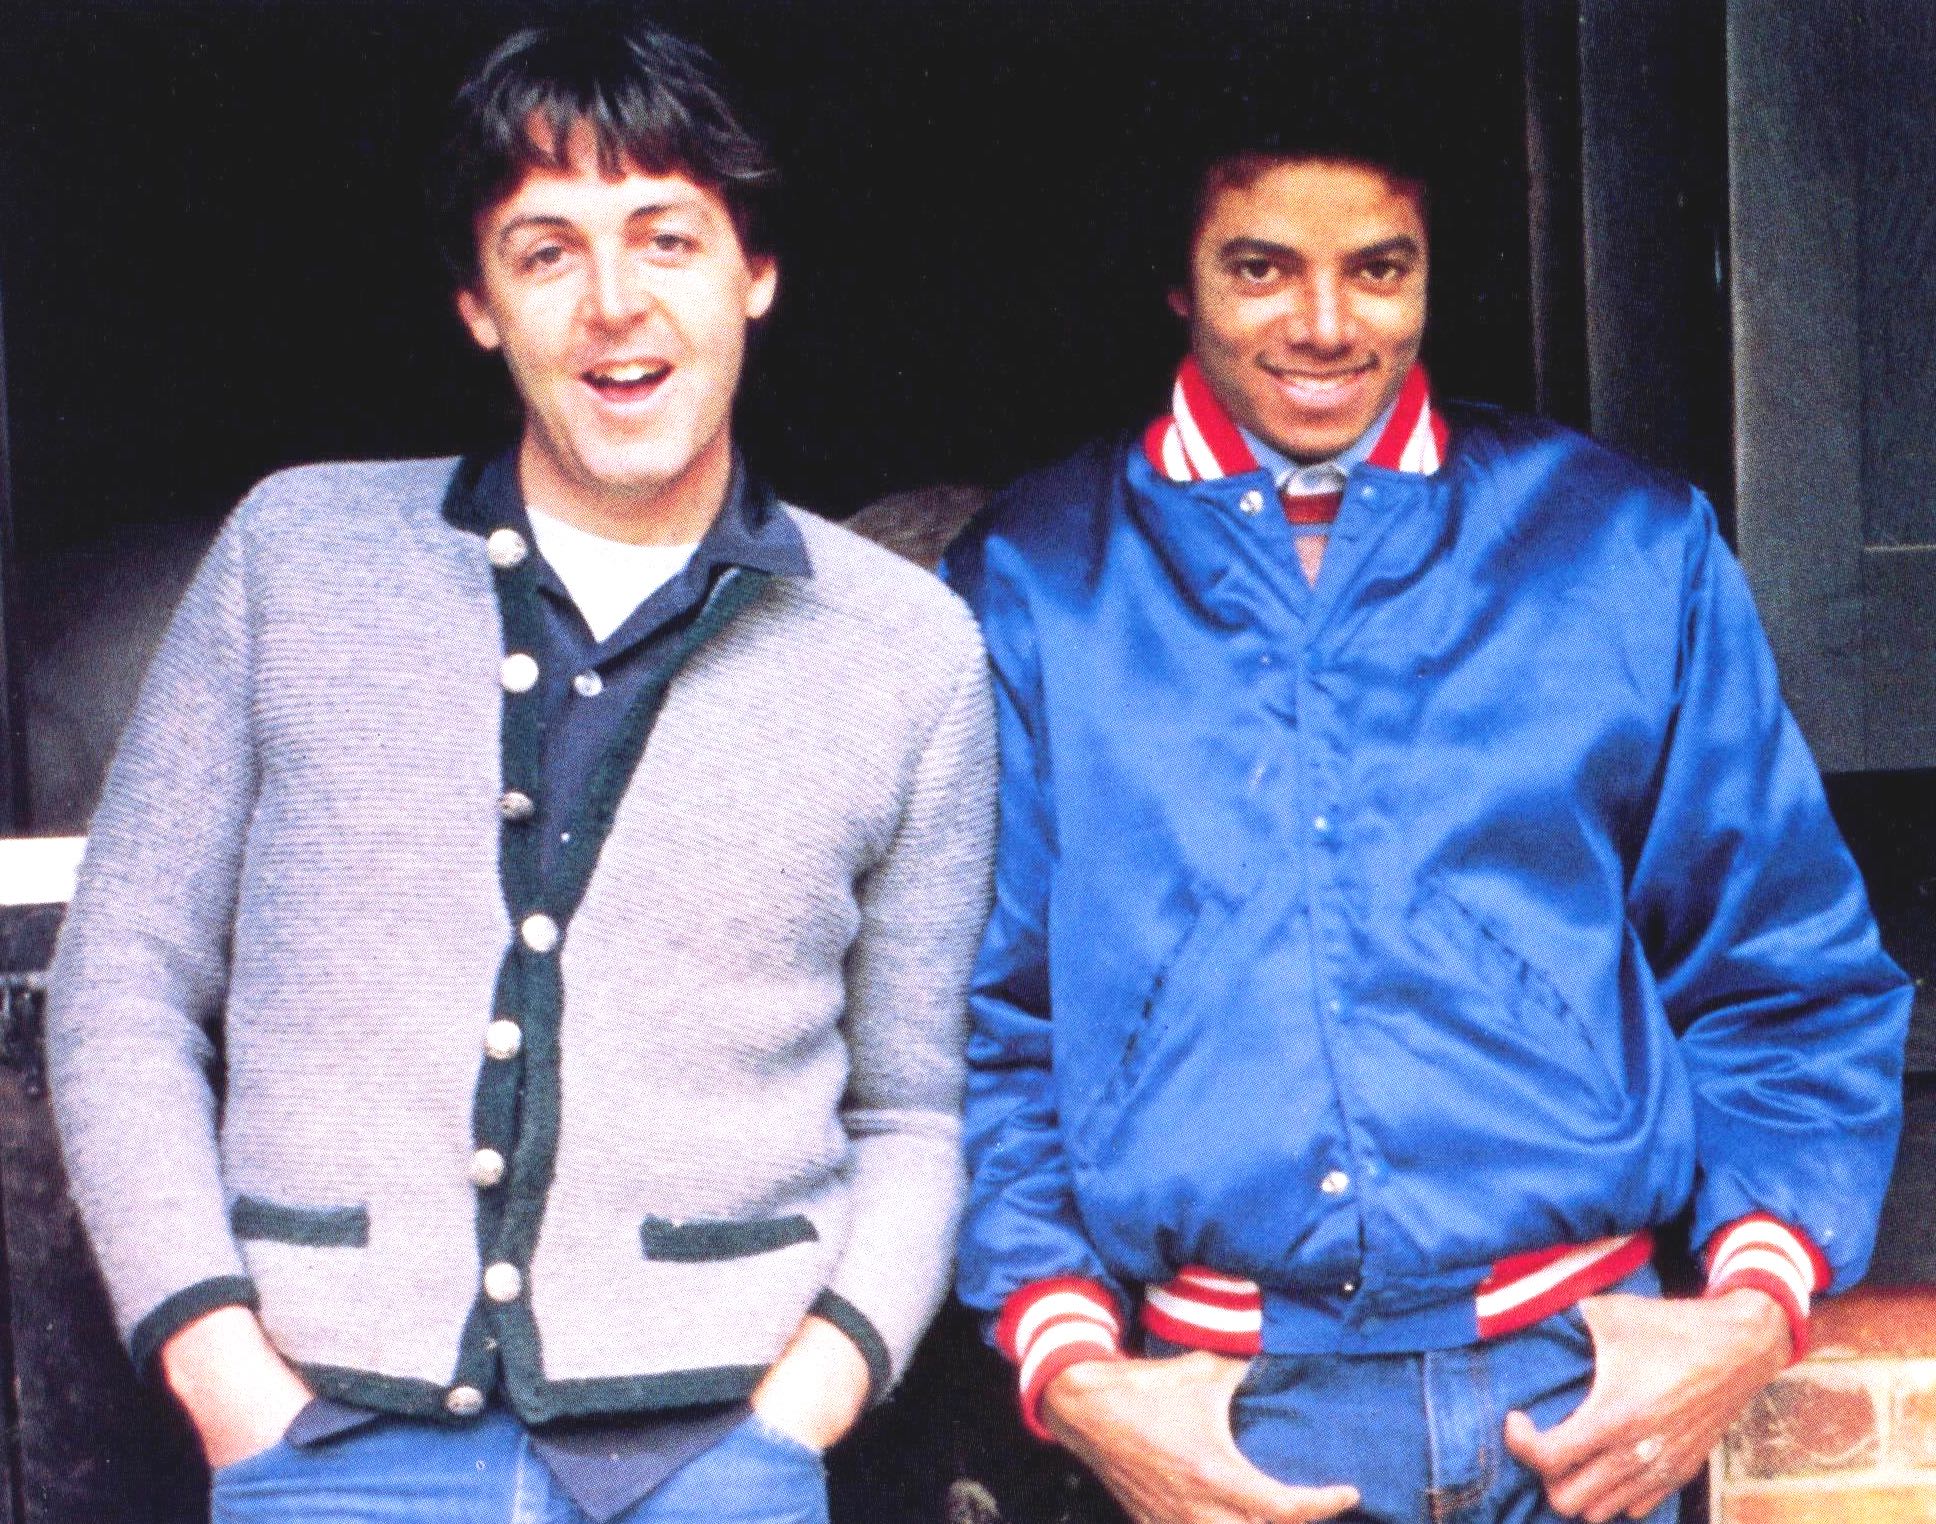 Paul and MJ